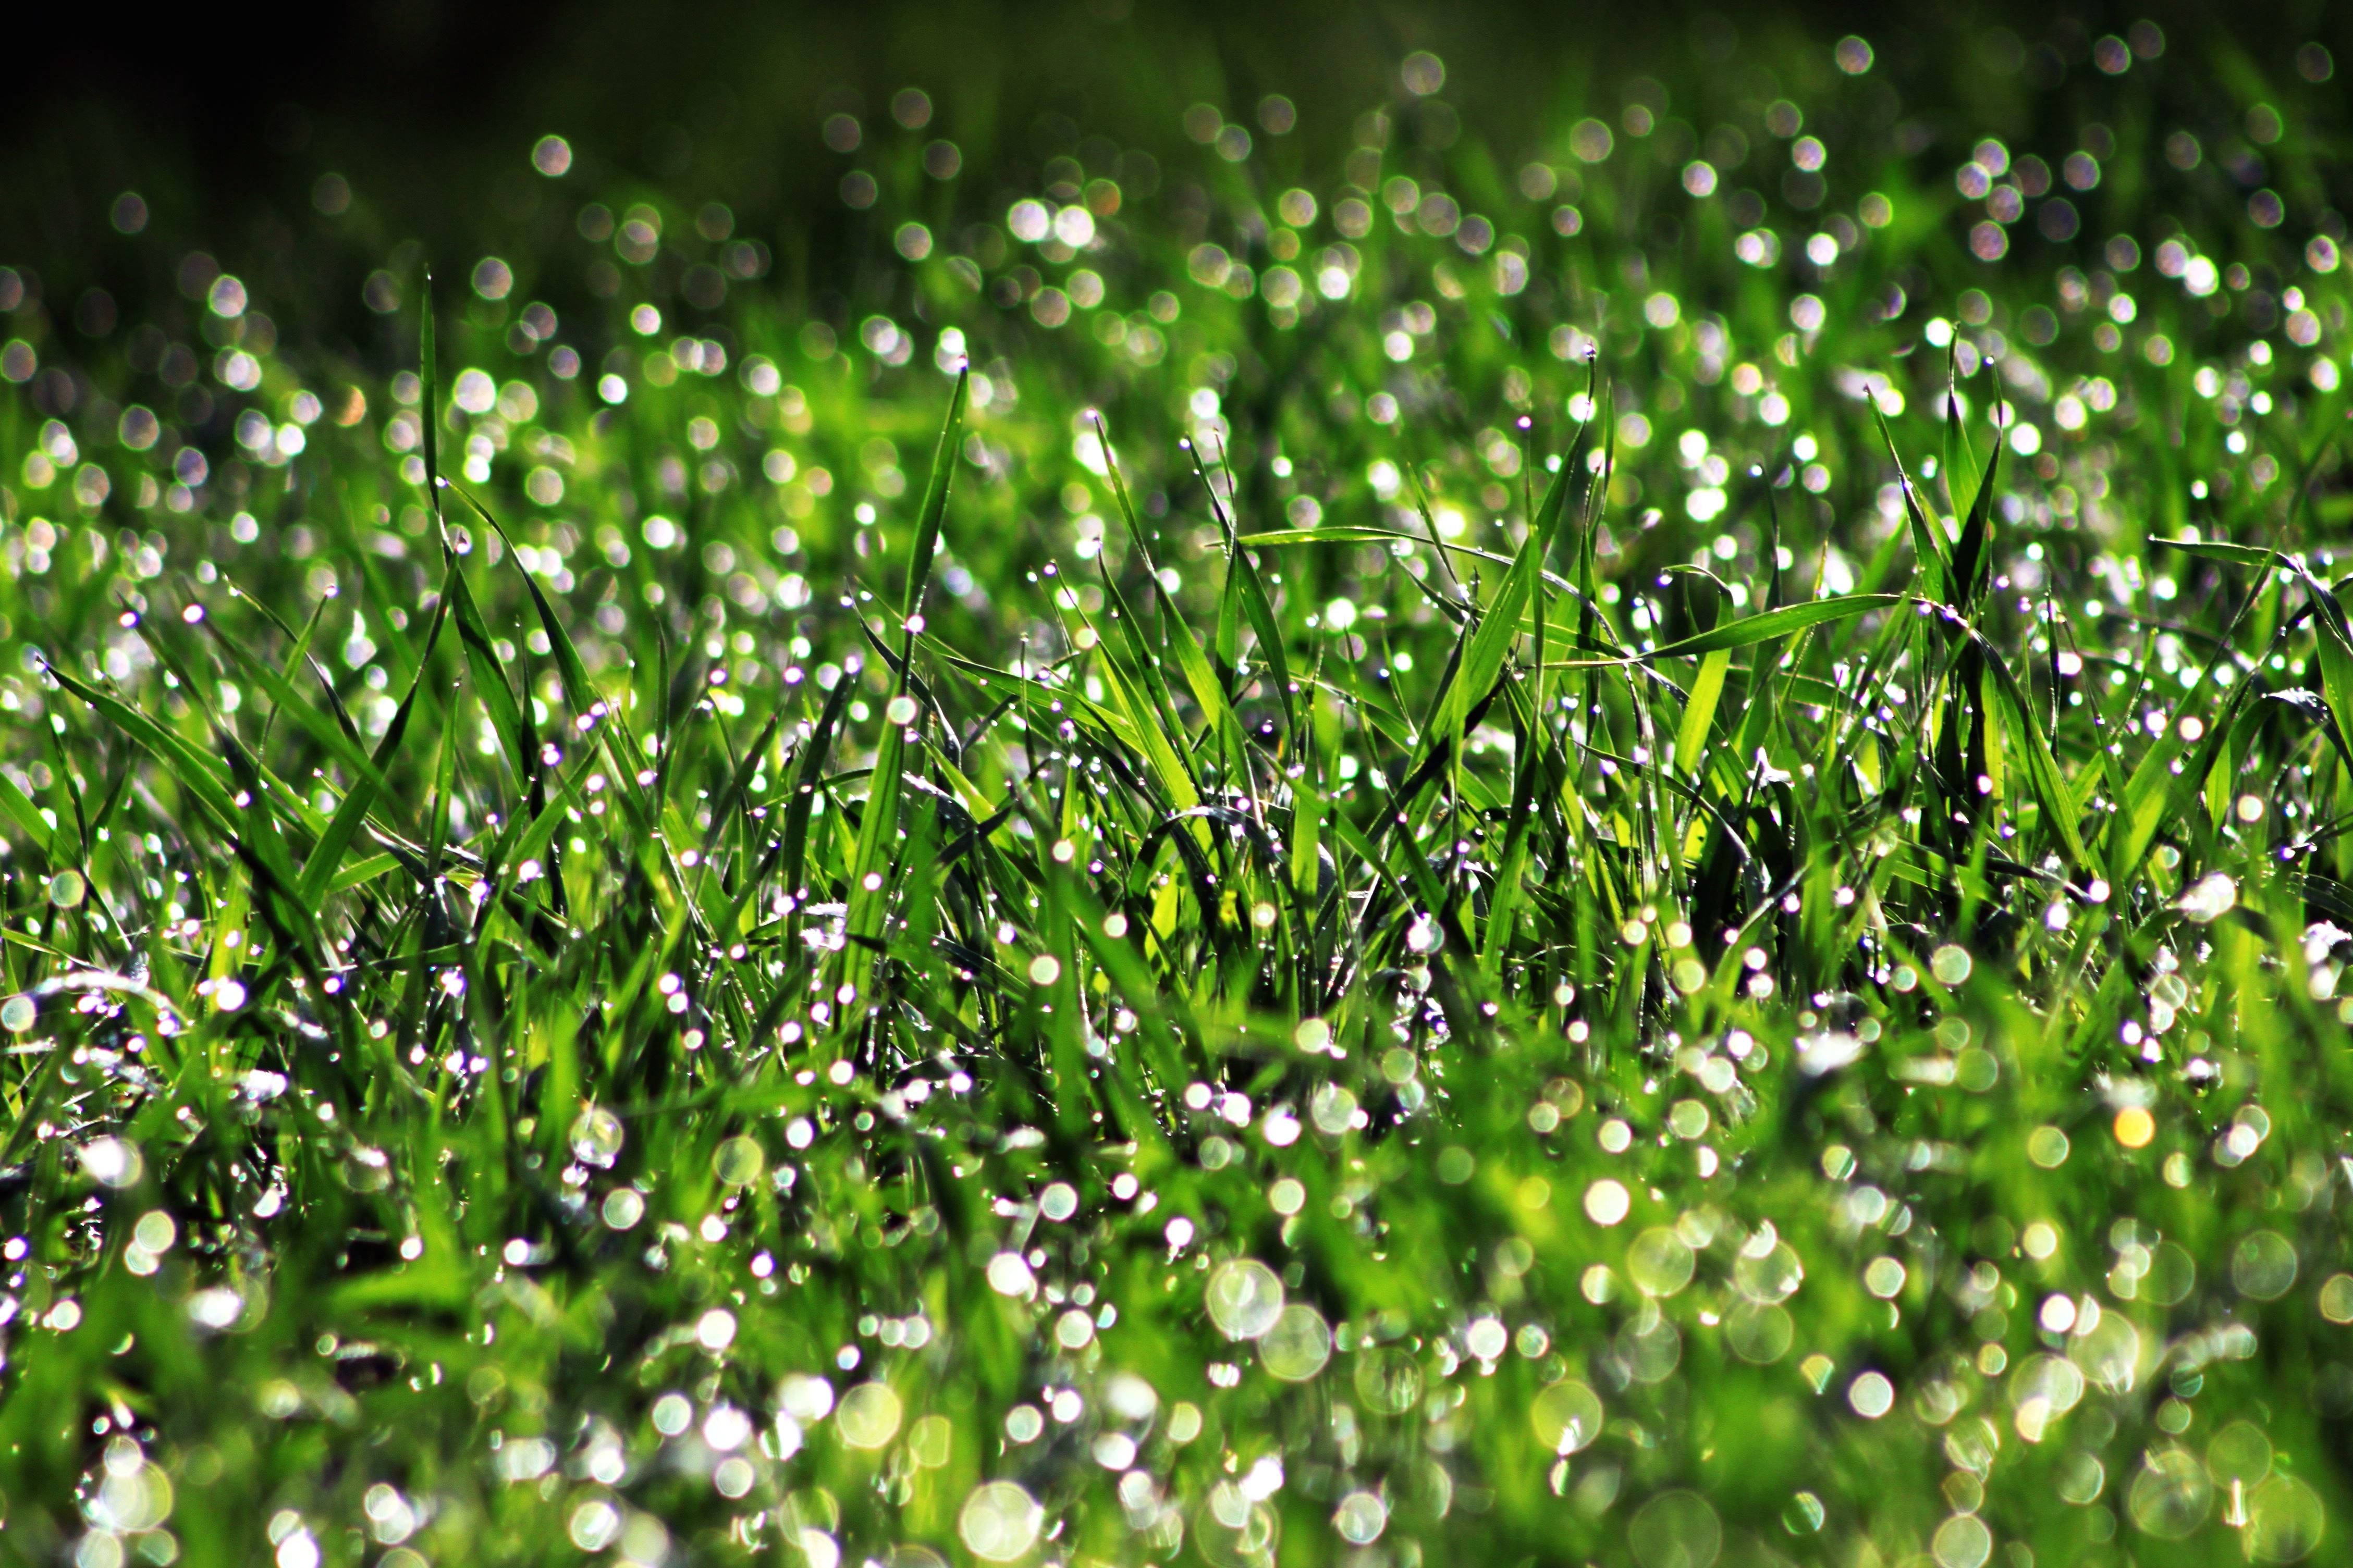 Free picture: lawn, summer, wet field, freshness, droplet, green grass